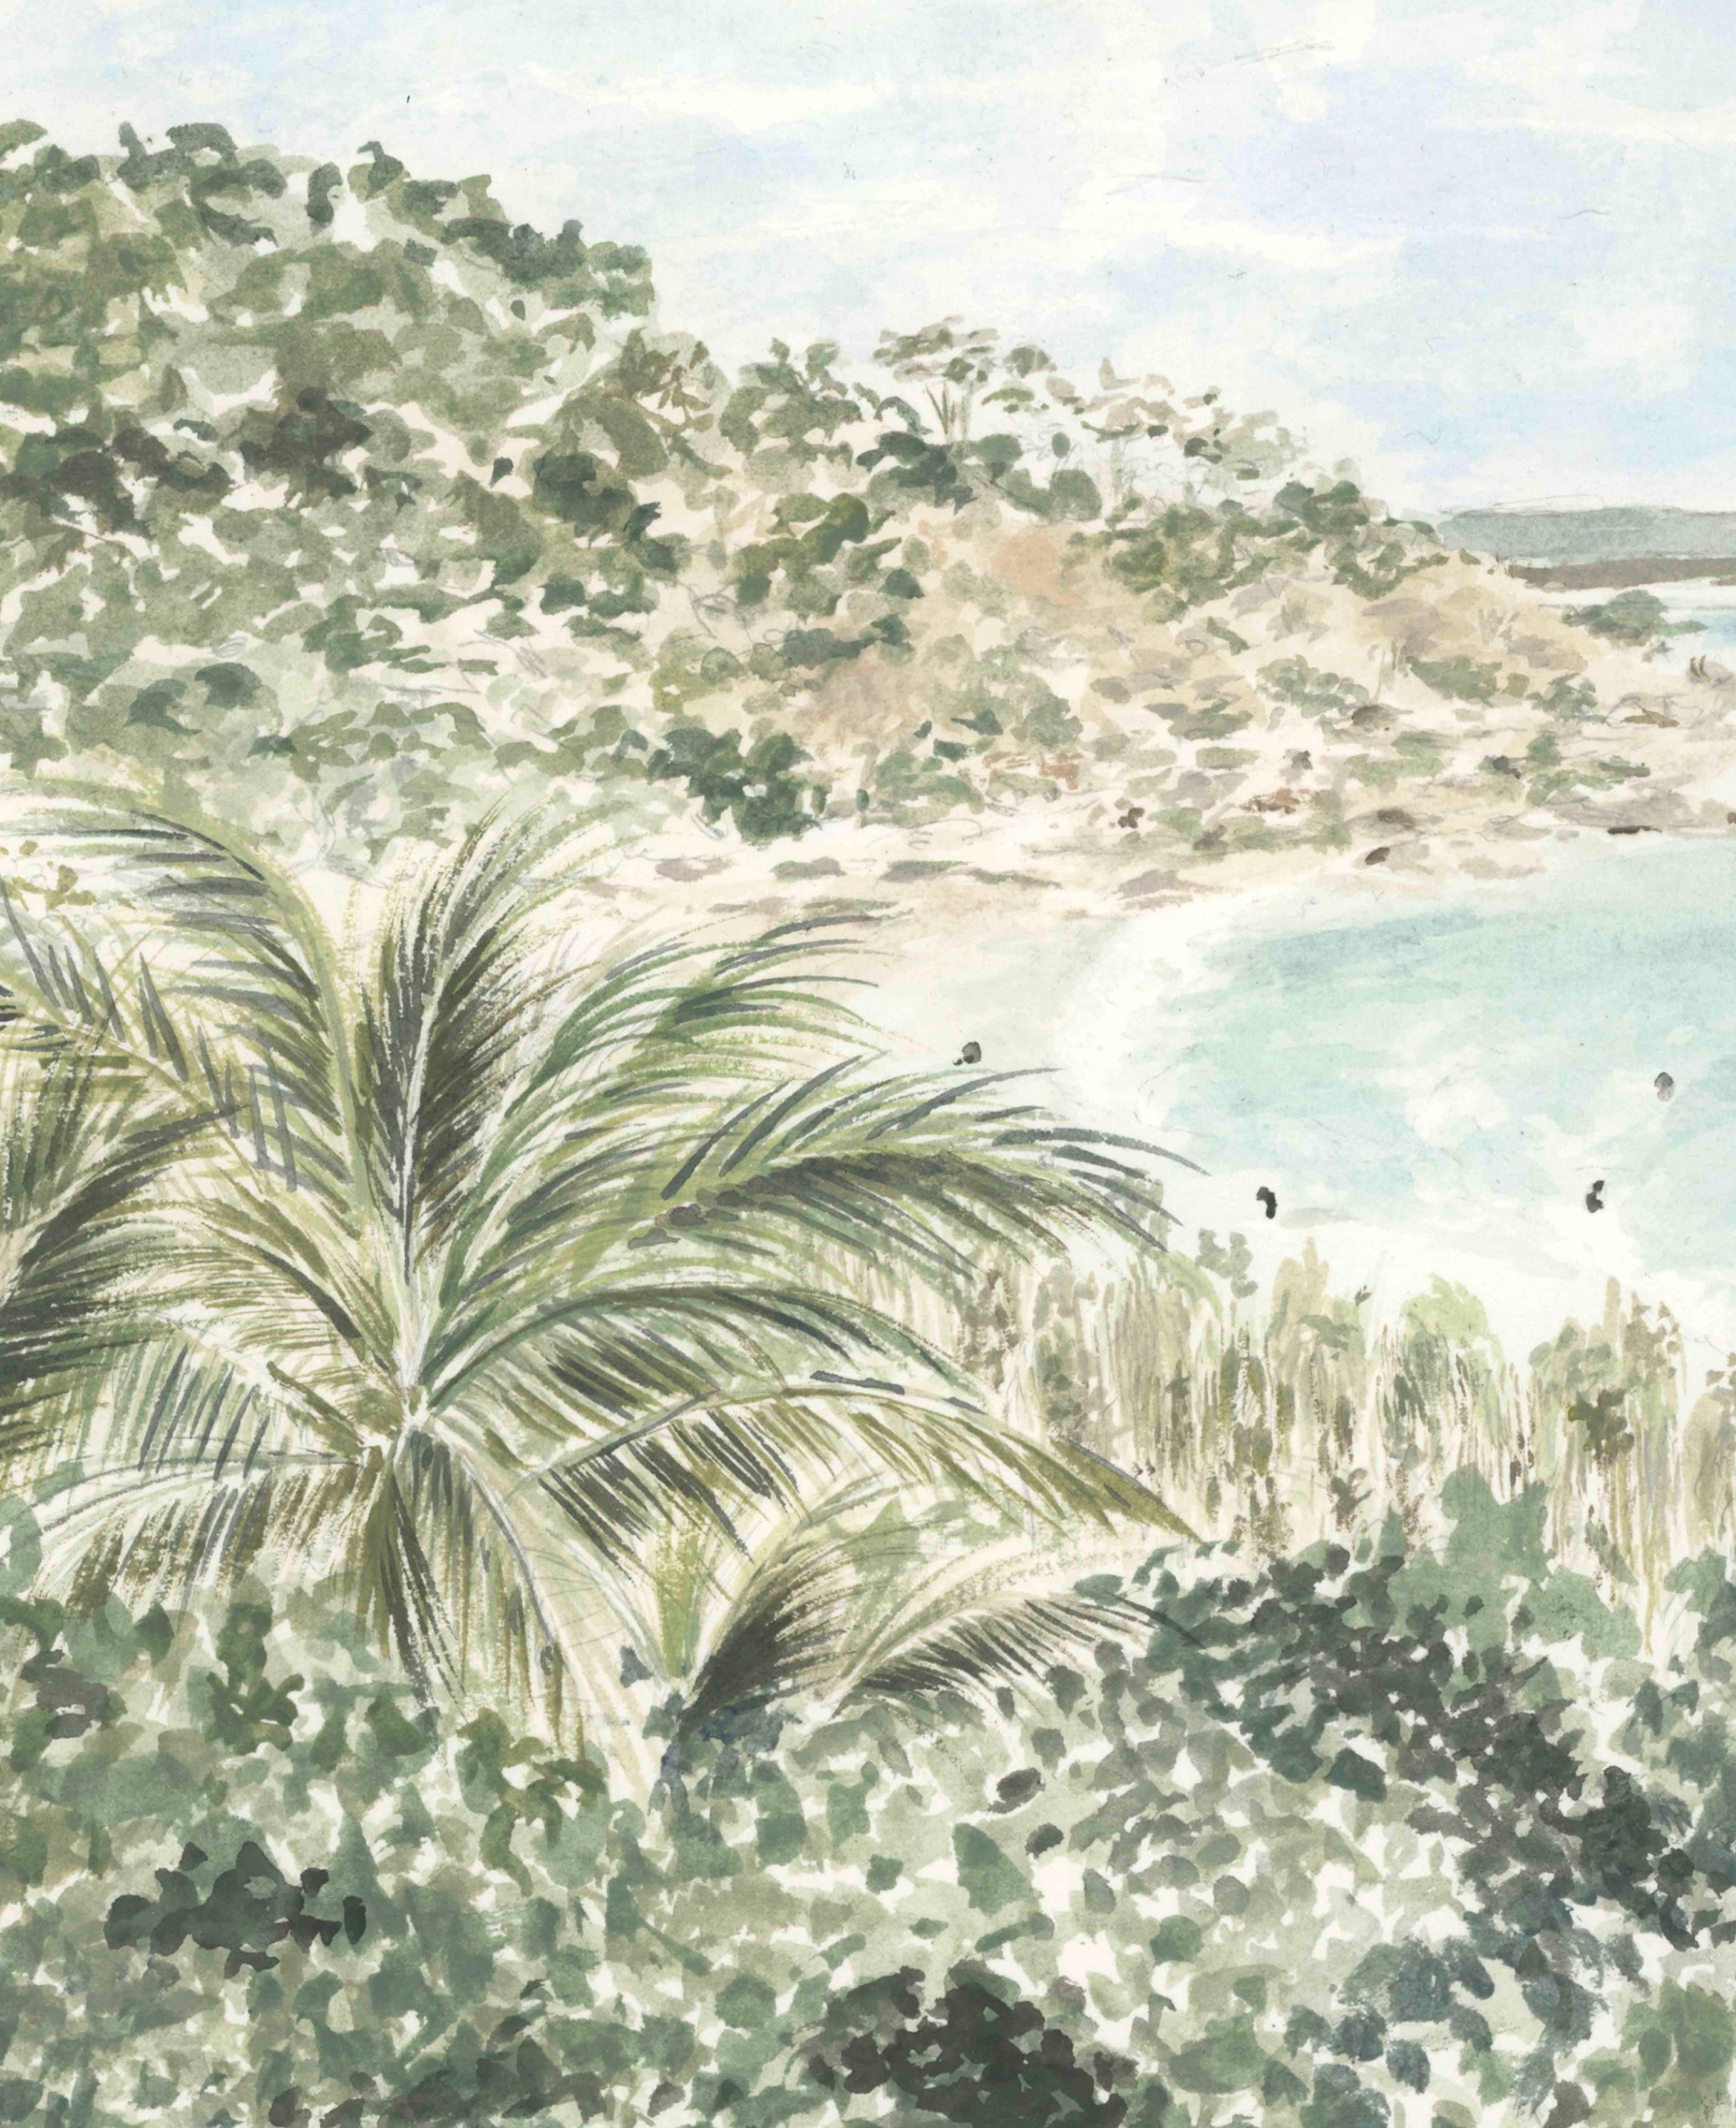 Bay
Watercolor on Archival Cotton Paper
This landscape watercolor painting reveals itself, transporting us to a serene bay where nature's harmonious beauty unfolds.The artist's brush captures a captivating interplay of colors. Within this ethereal